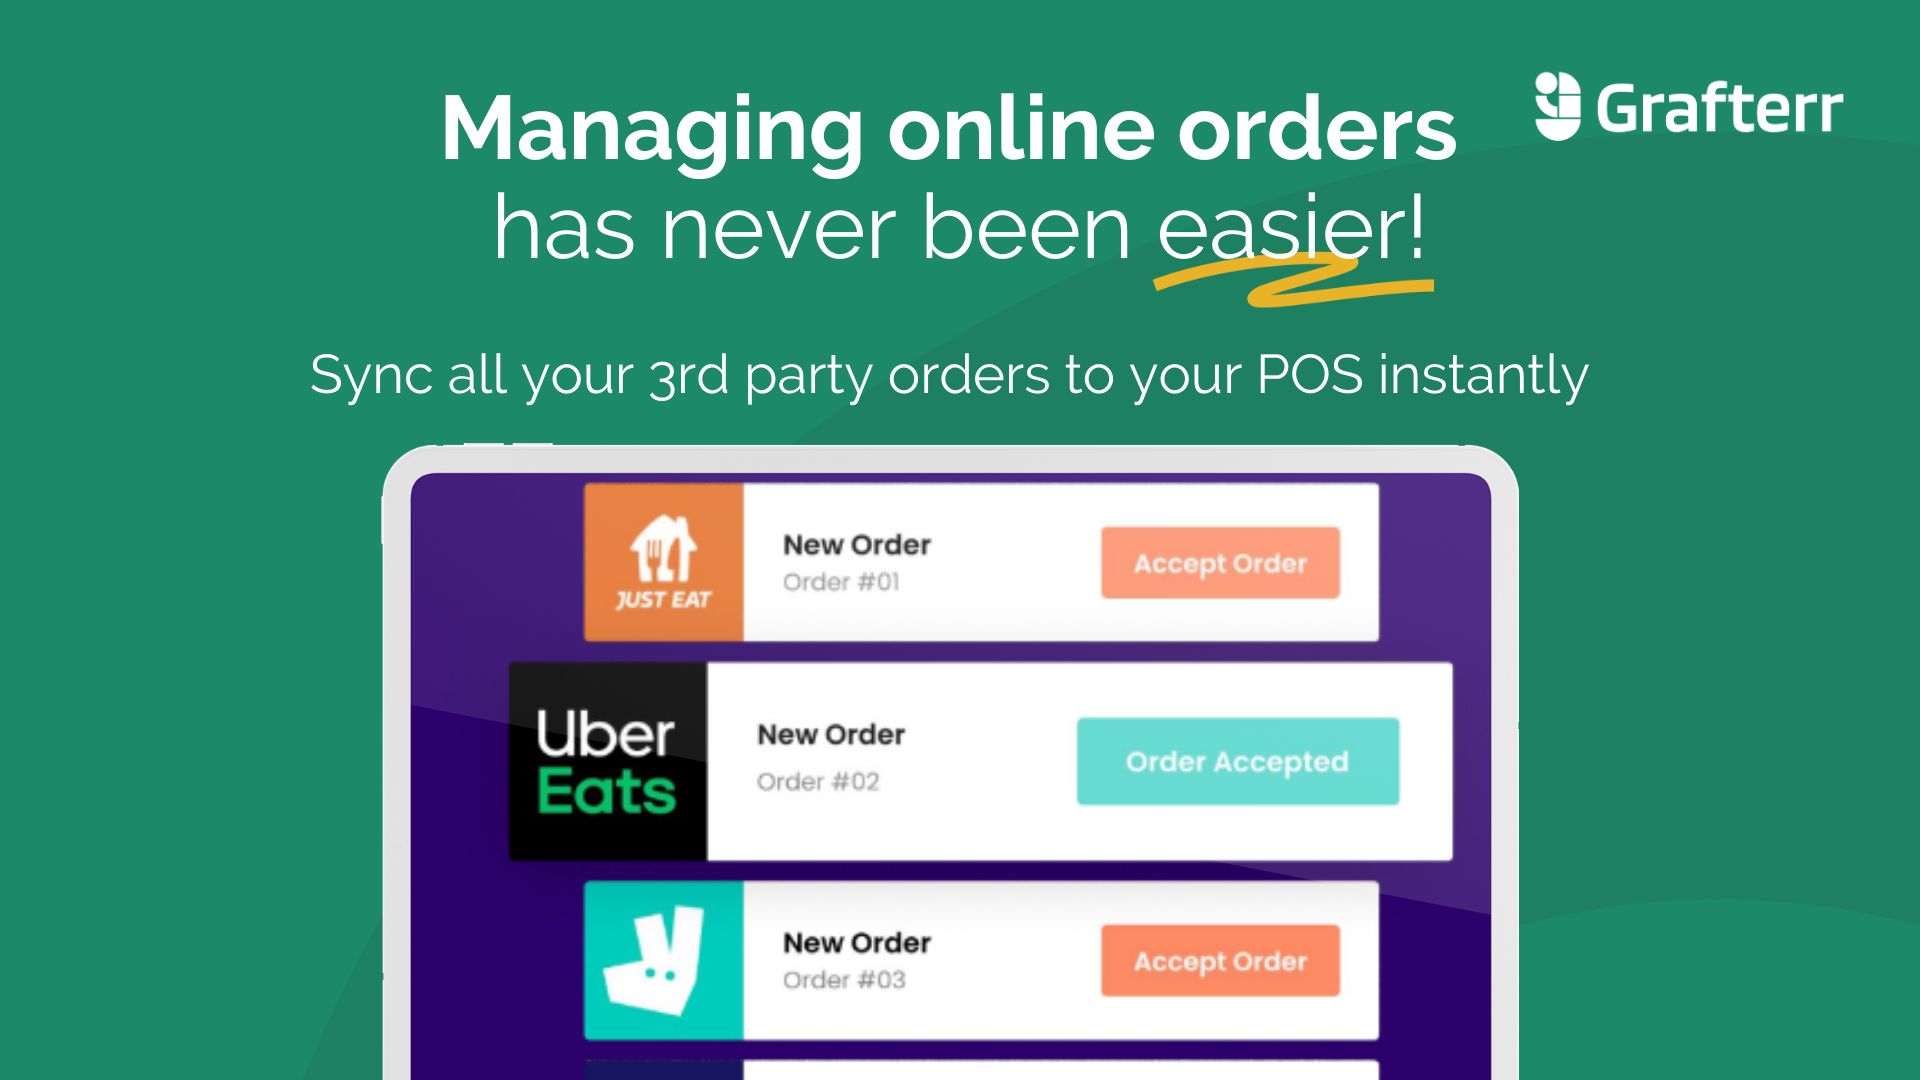 Sync all your online orders from popular platforms like JustEat, Deliveroo, and UberEats seamlessly to your POS